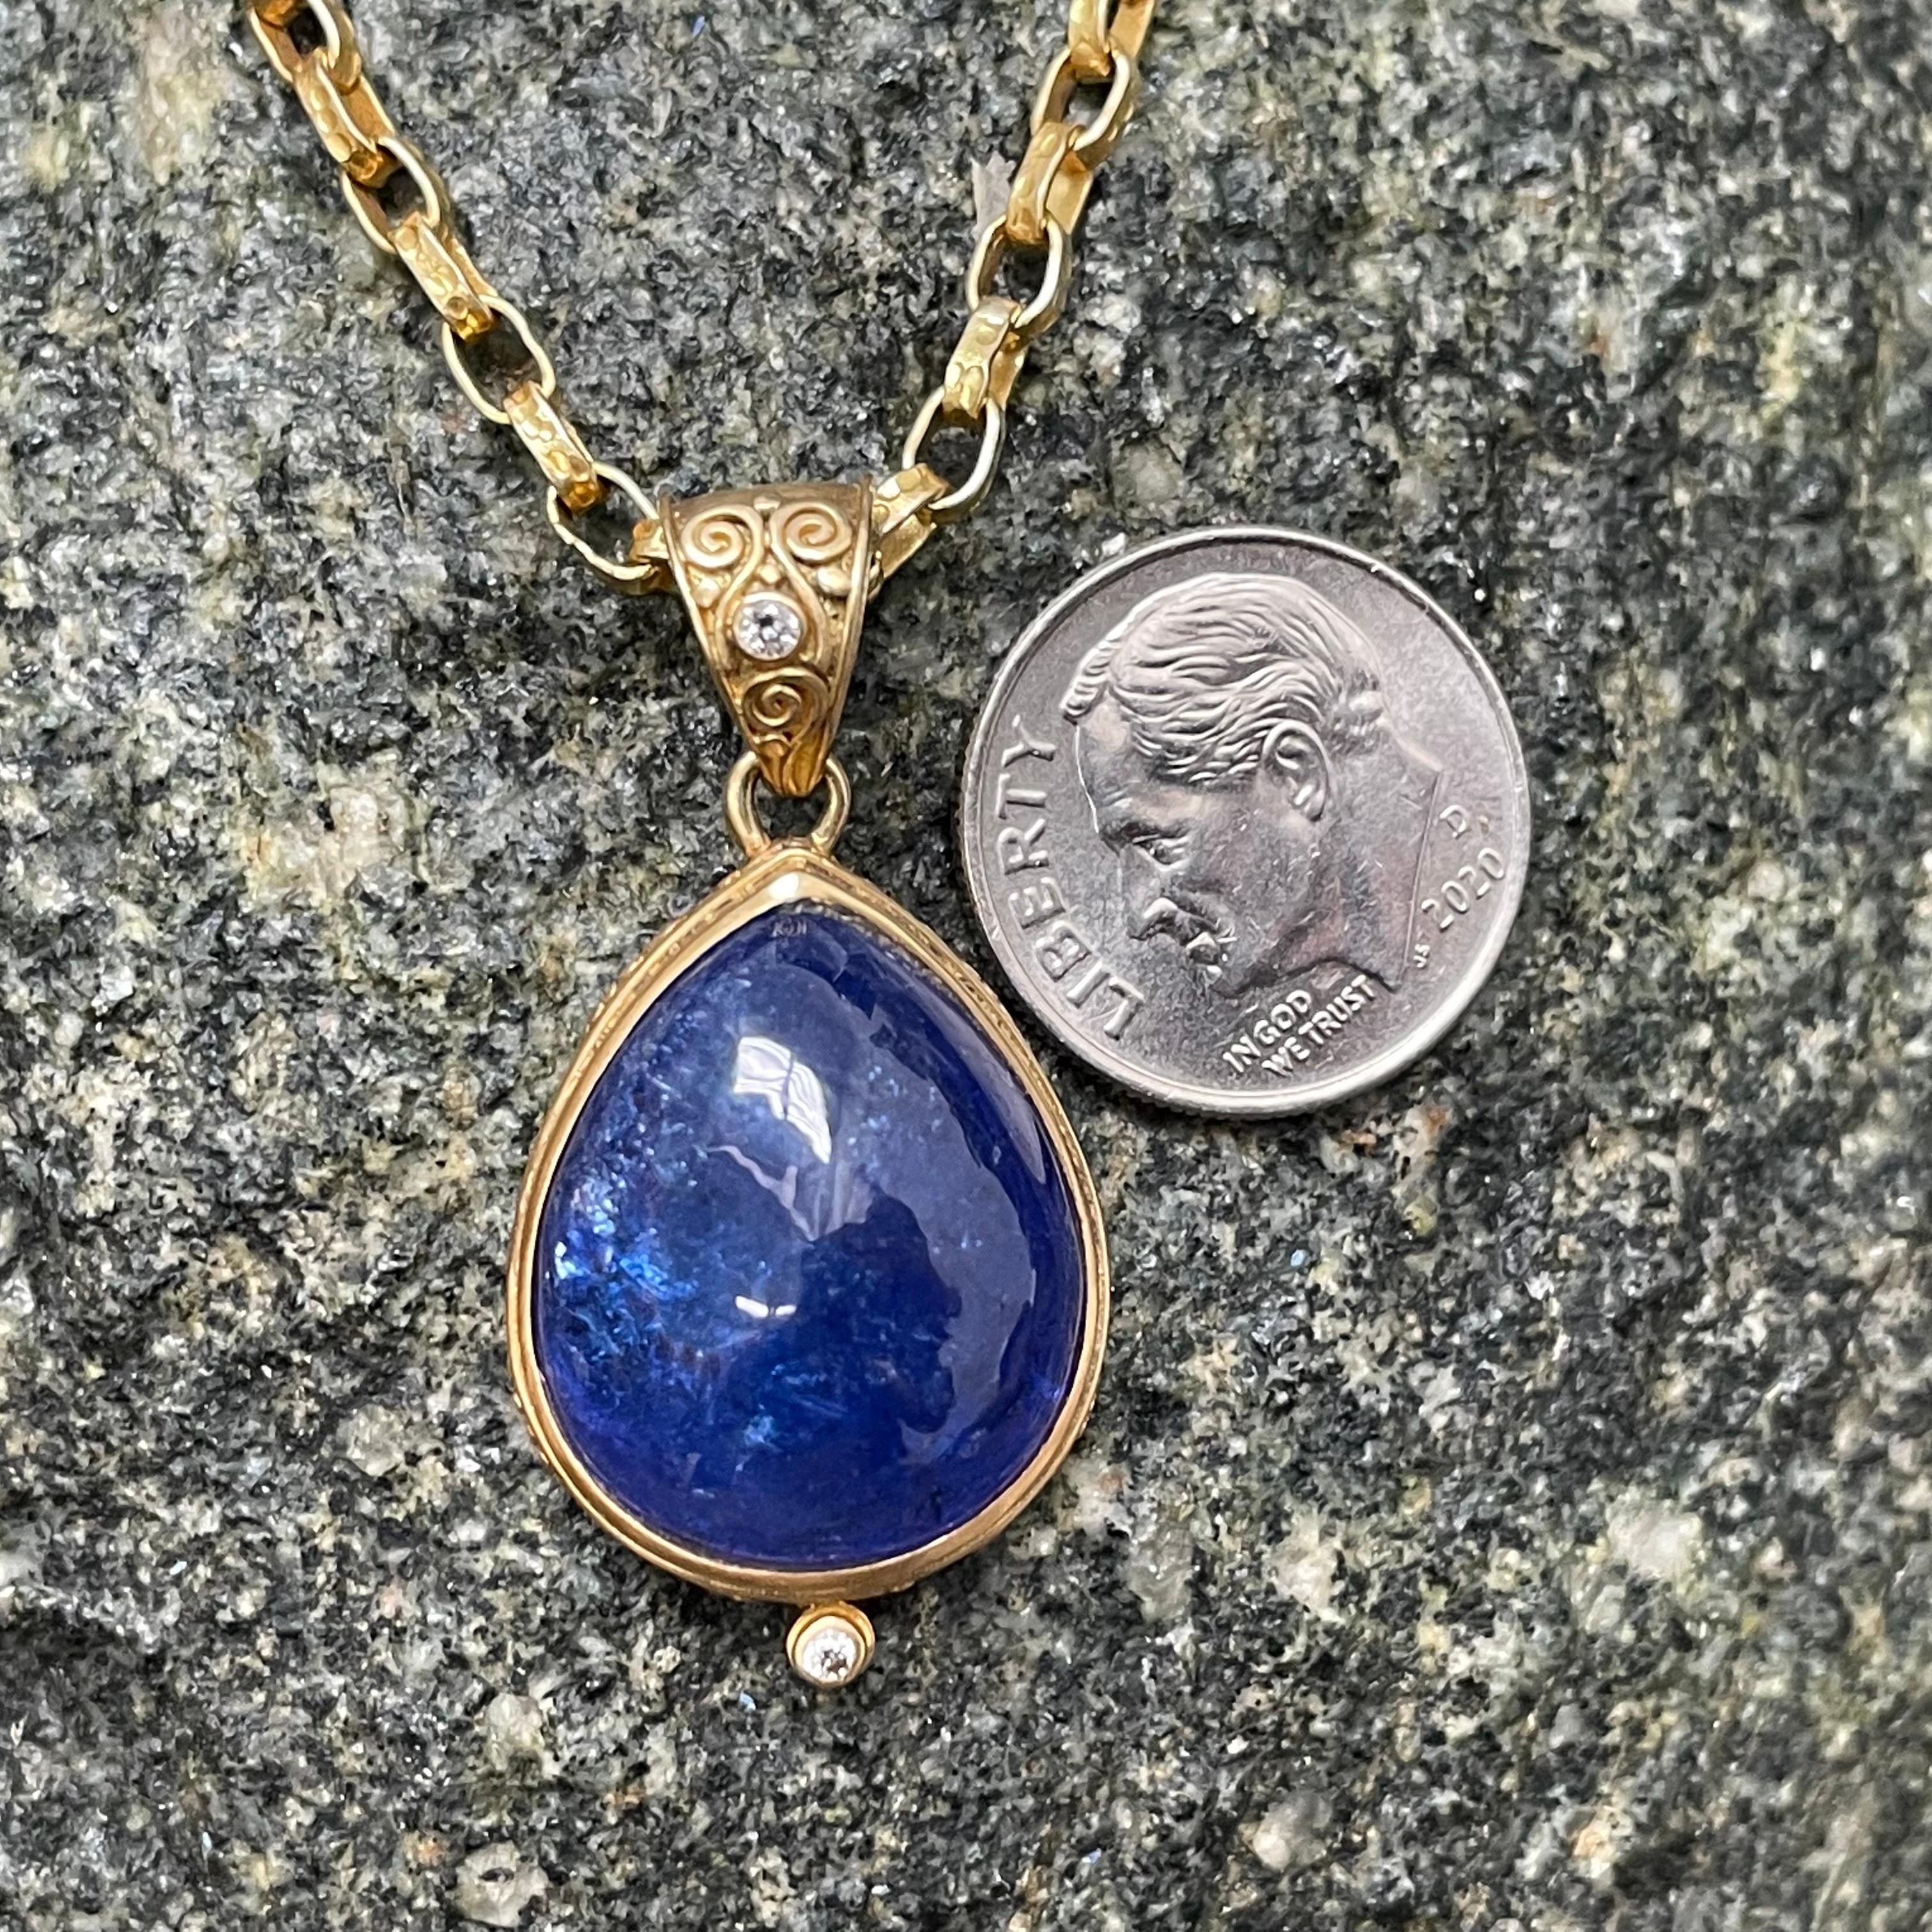 A beautiful blue 23 x 30 mm pear shaped tanzanite cabochon is held in a cupped Steven Battelle designed pendant with spiral scroll accenting on the bezel.  A similar scrolled bail is highlighted by a 1.8 mm VS1 diamond.  Sweet!  The 18K handmade